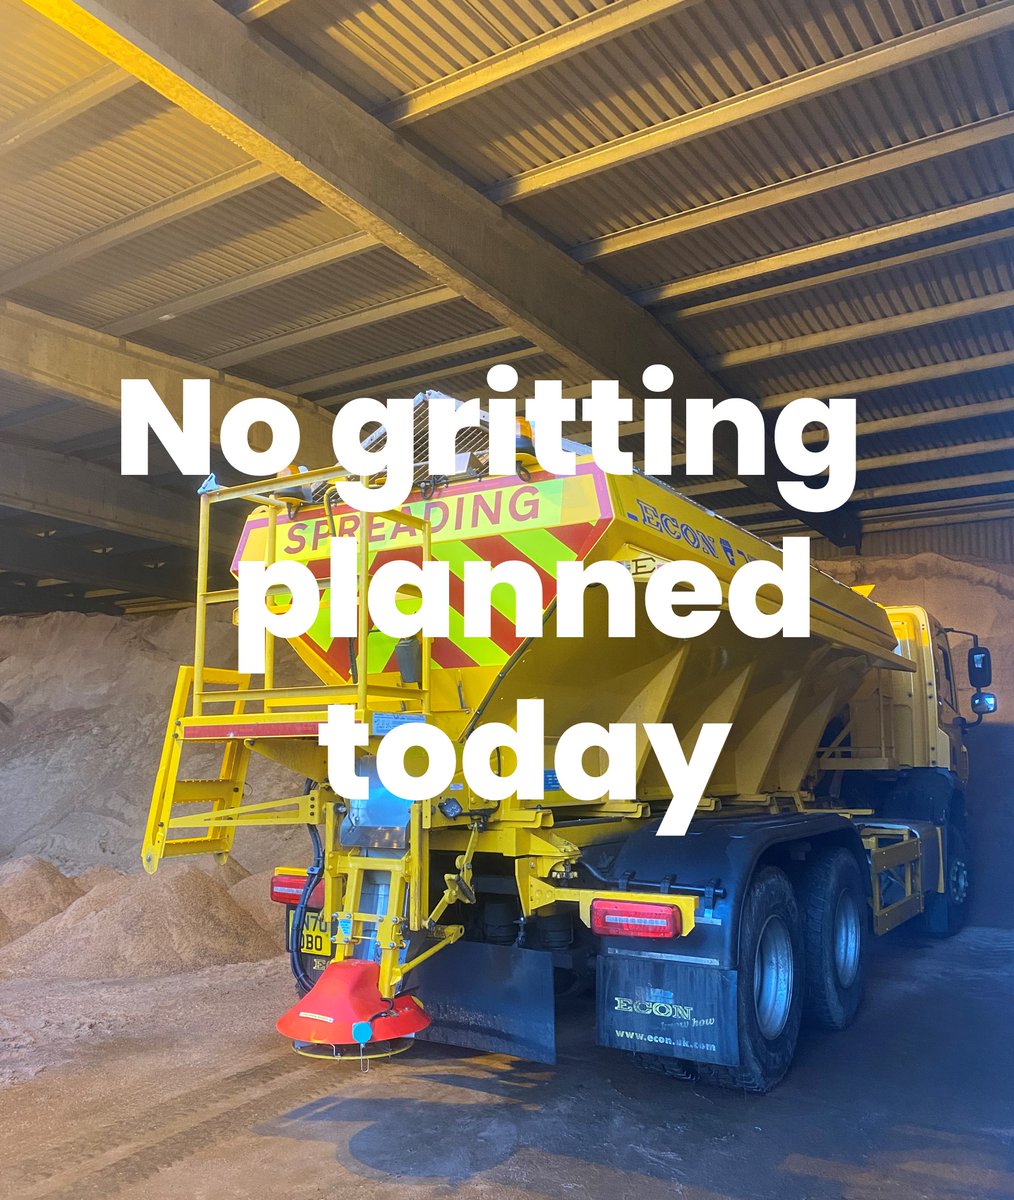 ❄️ Winter Service Decision 24-03-24 ❄️ No gritting action will be taken tonight. For more winter updates please visit: ow.ly/R08A50PY80u